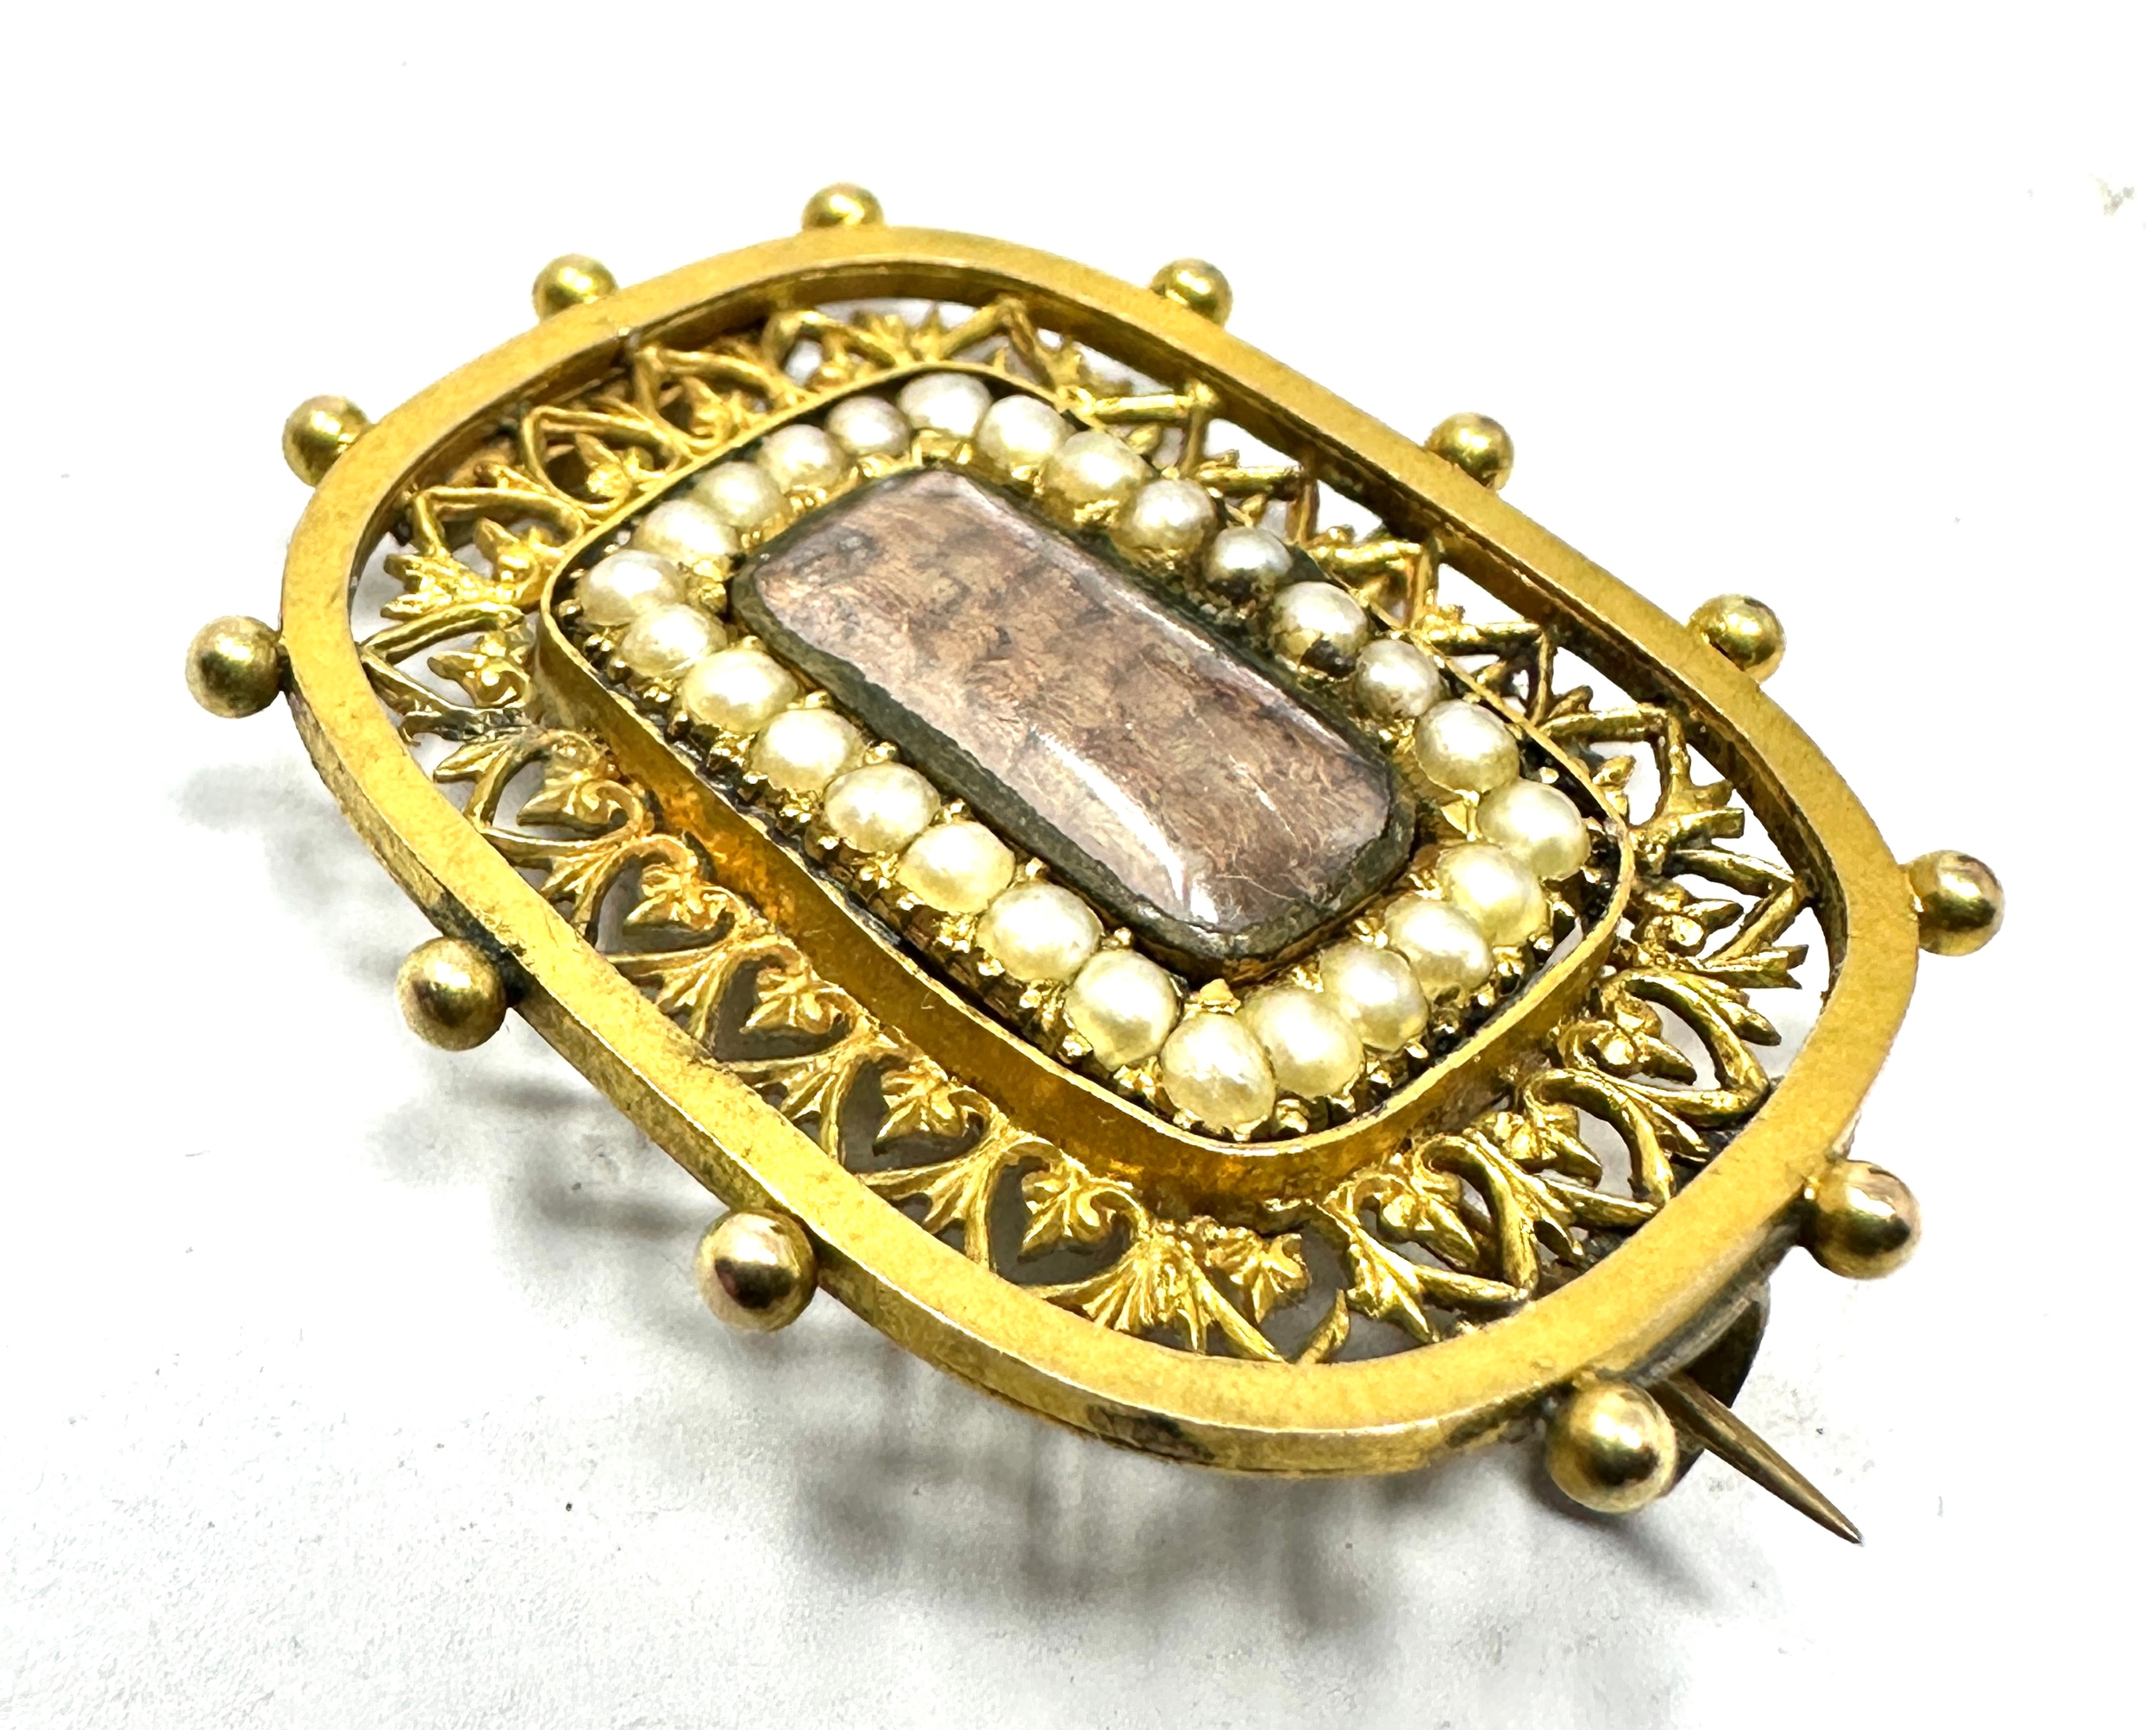 Antique 15ct gold mourning brooch measures approx 3cm by 2.3cm xrt tested as 15ct gold weight 4.4g - Image 2 of 3